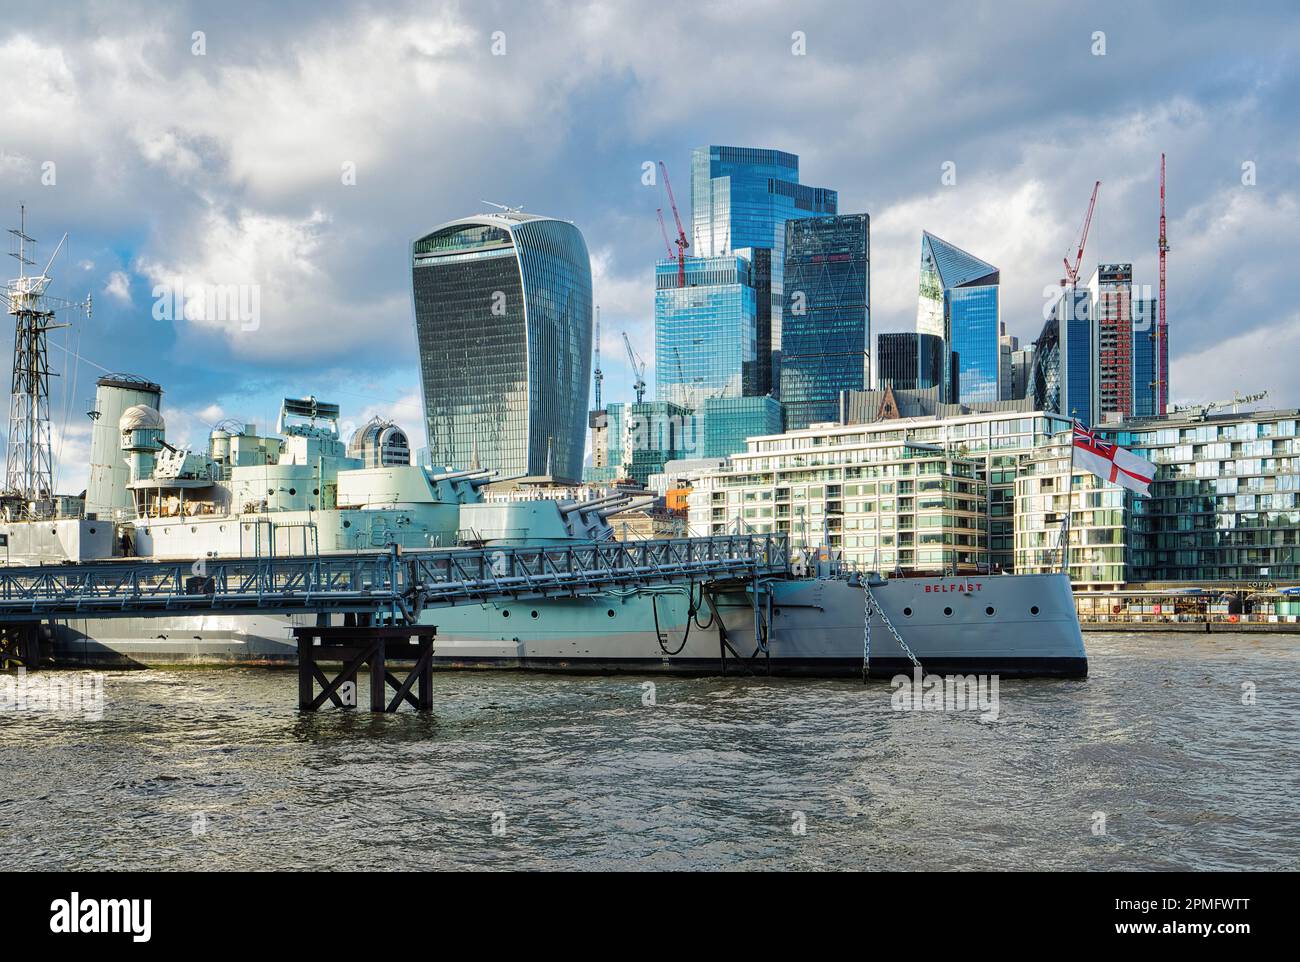 The cannons of the WWII warship HMS Belfast provide a striking contrast with the sleek architectural backdrop of London's financial district. Stock Photo